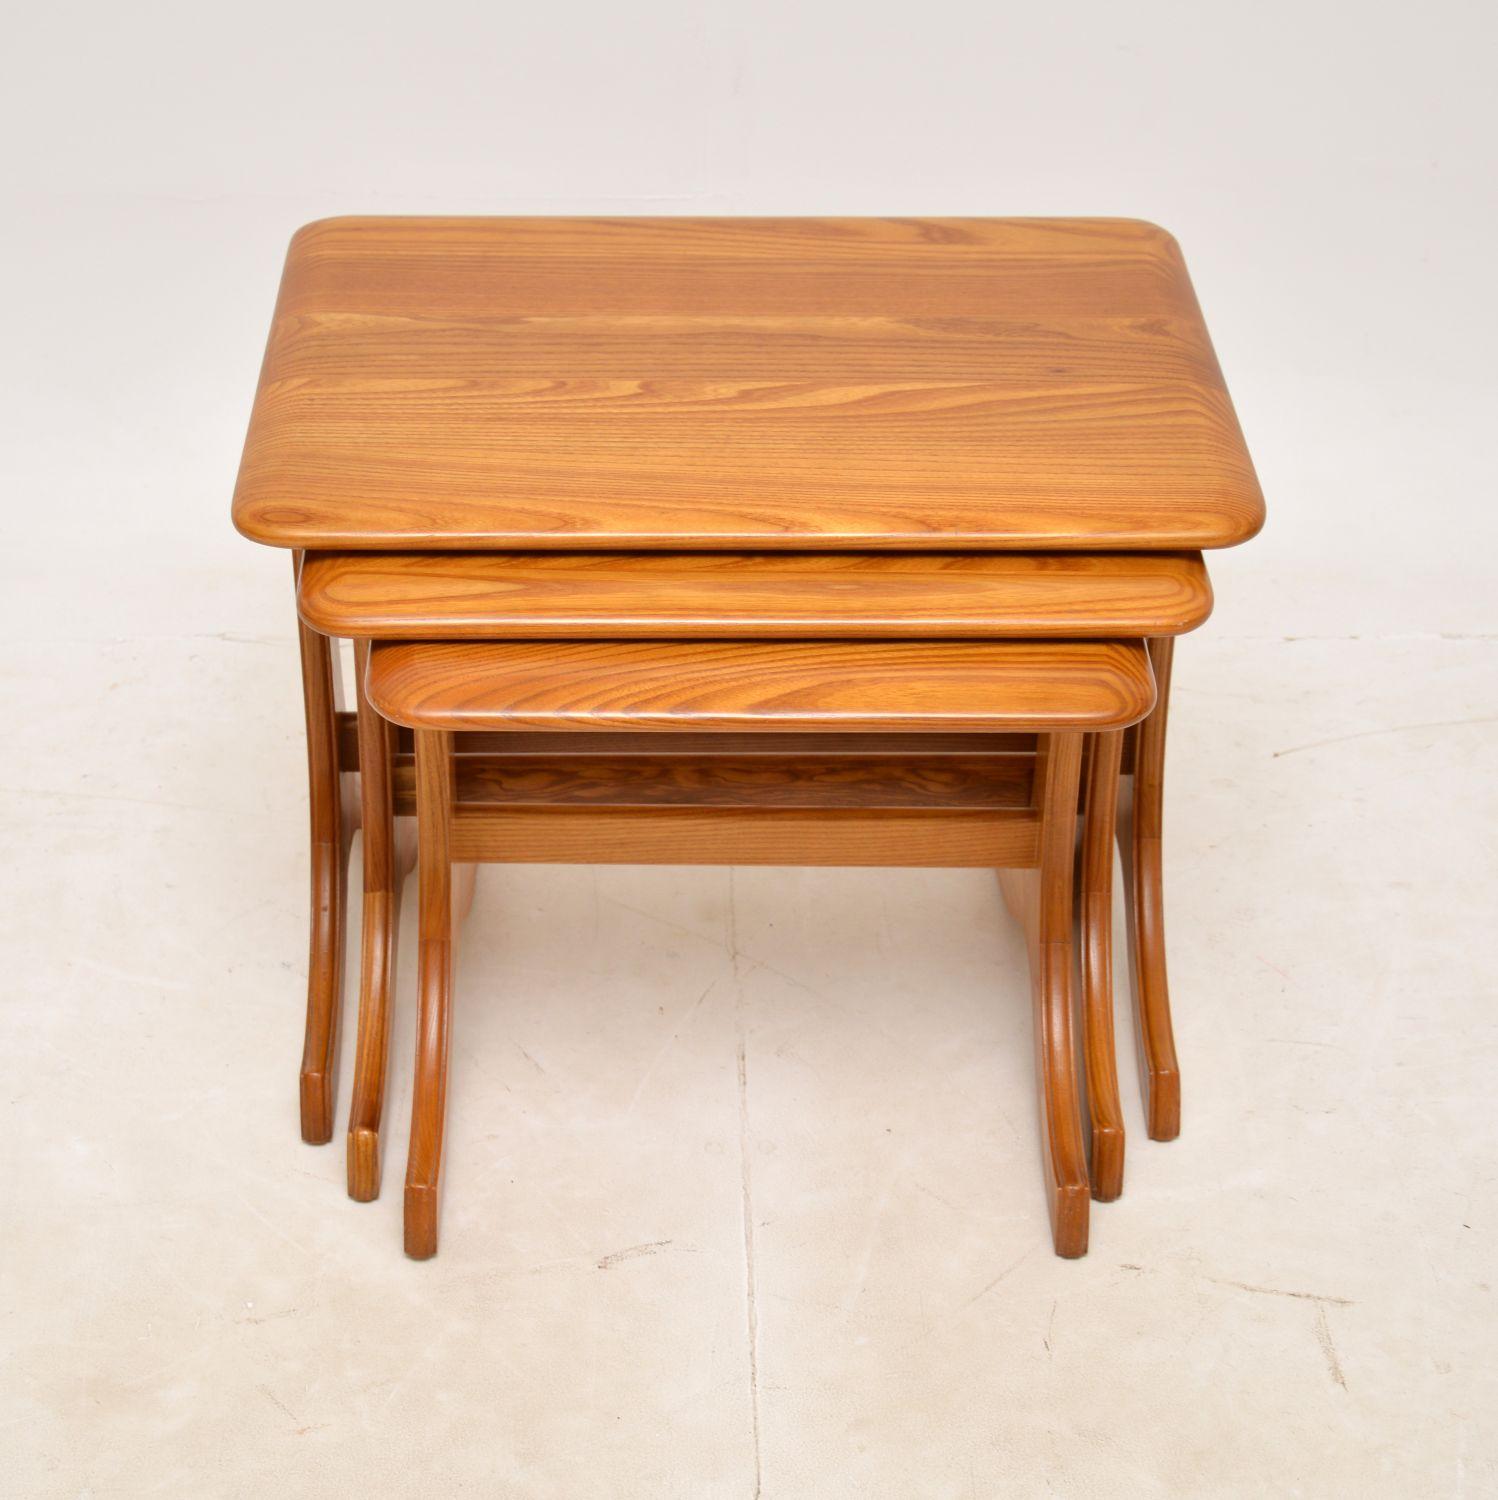 A beautifully constructed nest of three solid elm nesting tables. They were made in England, and they date from around the 1970s.
The quality is amazing, they are very well made from solid elm which has some gorgeous grain patterns. They are a